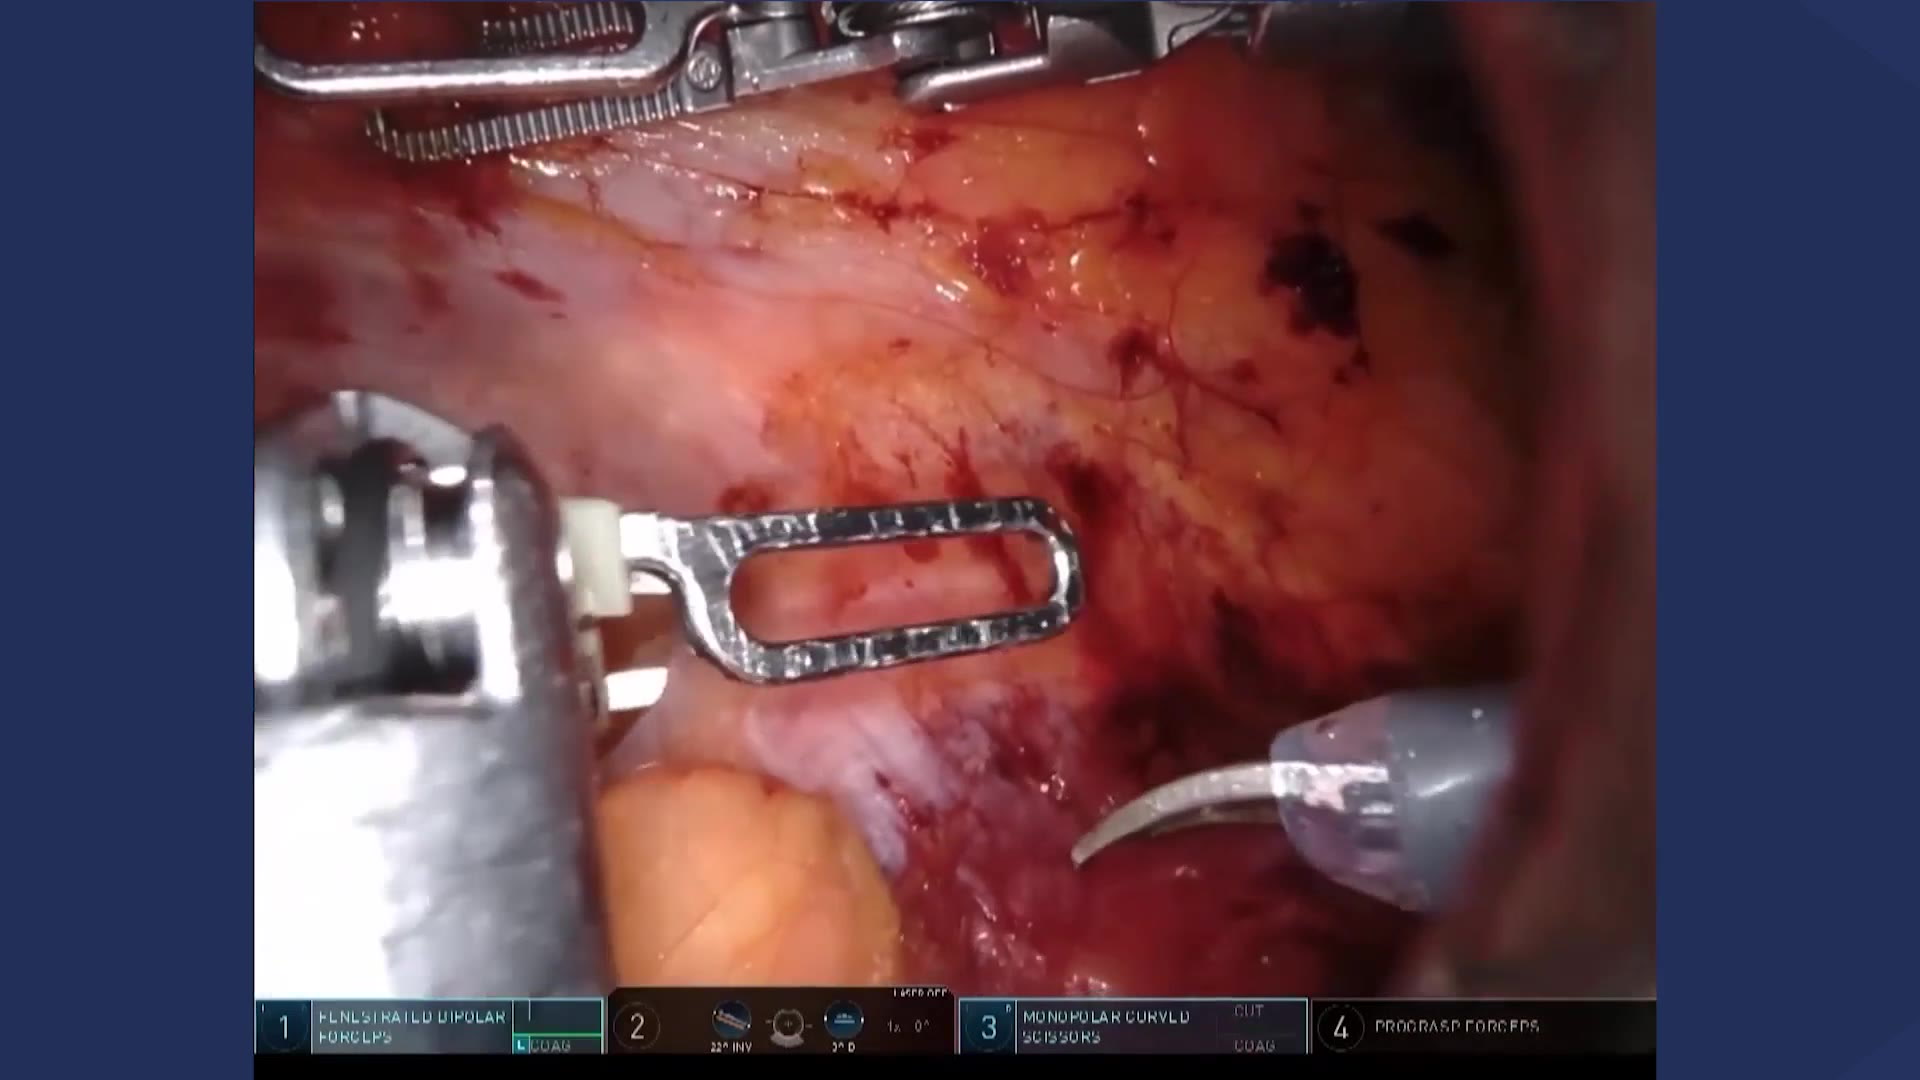 Robot-assisted left retroperitoneal partial nephrectomy (RAPN)